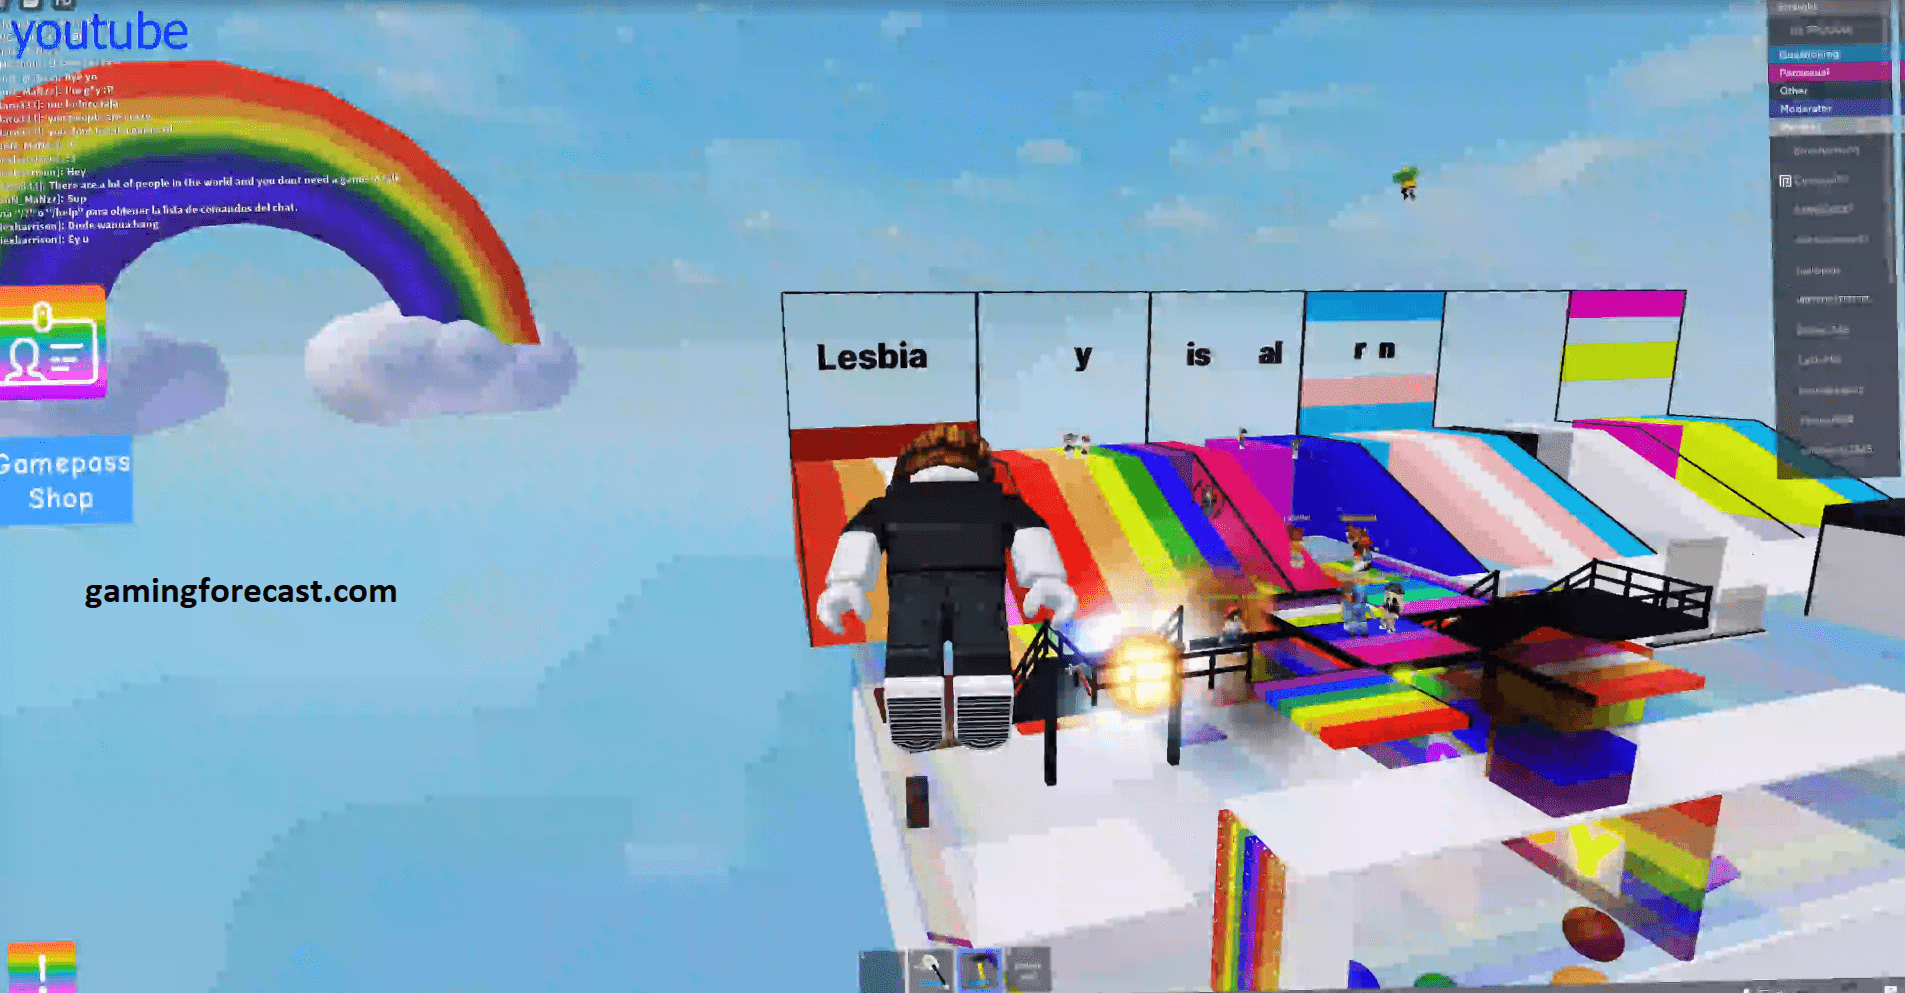 Roblox Hack Download Pc Destroy Lobby Fly Aimbot Scripts 2021 Gaming Forecast Download Free Online Game Hacks - roblox hacks free no download